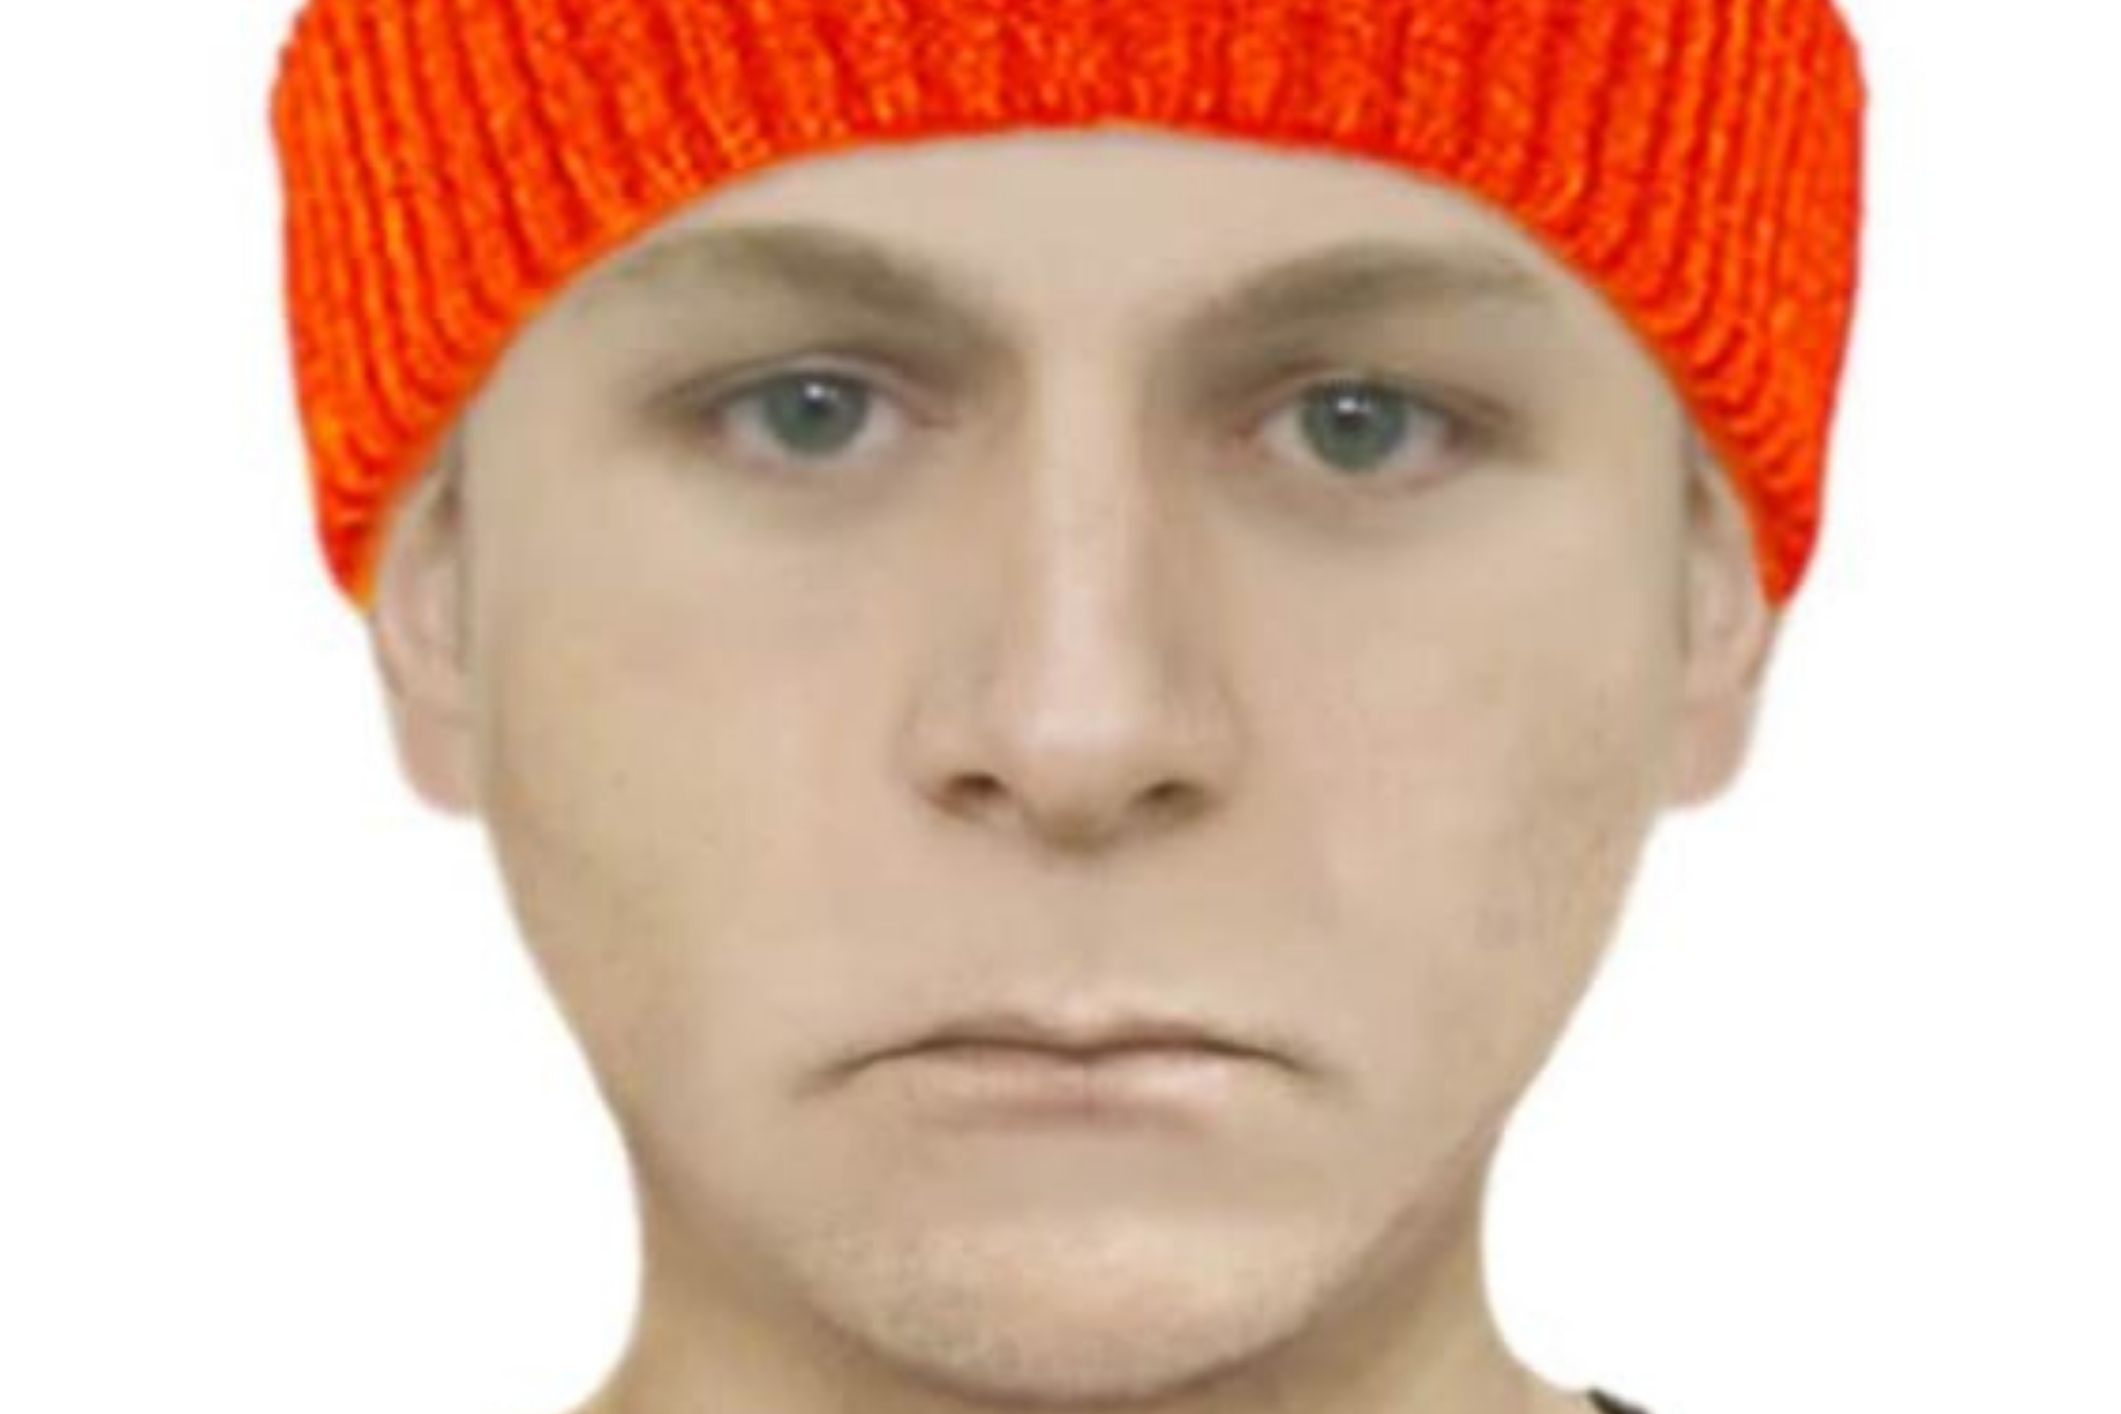 Police hunt man who sexually assaulted 90 year old woman